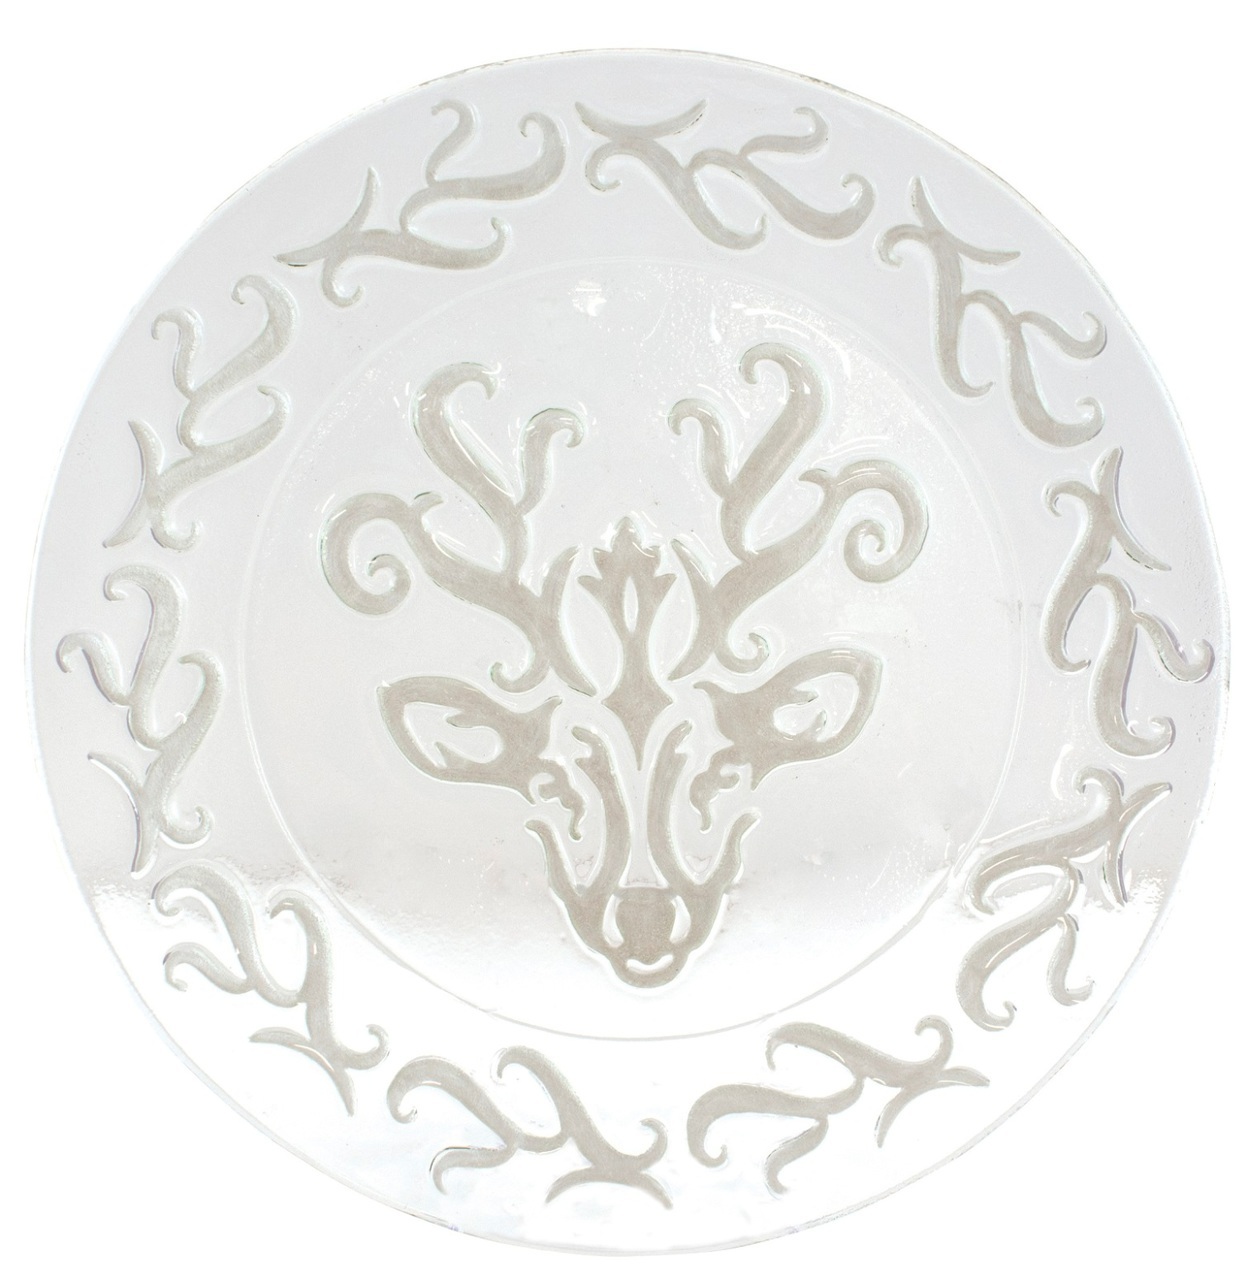 Chalet Reindeer Christmas Holiday Embossed Glass 13 Inch Plate Serving Platter